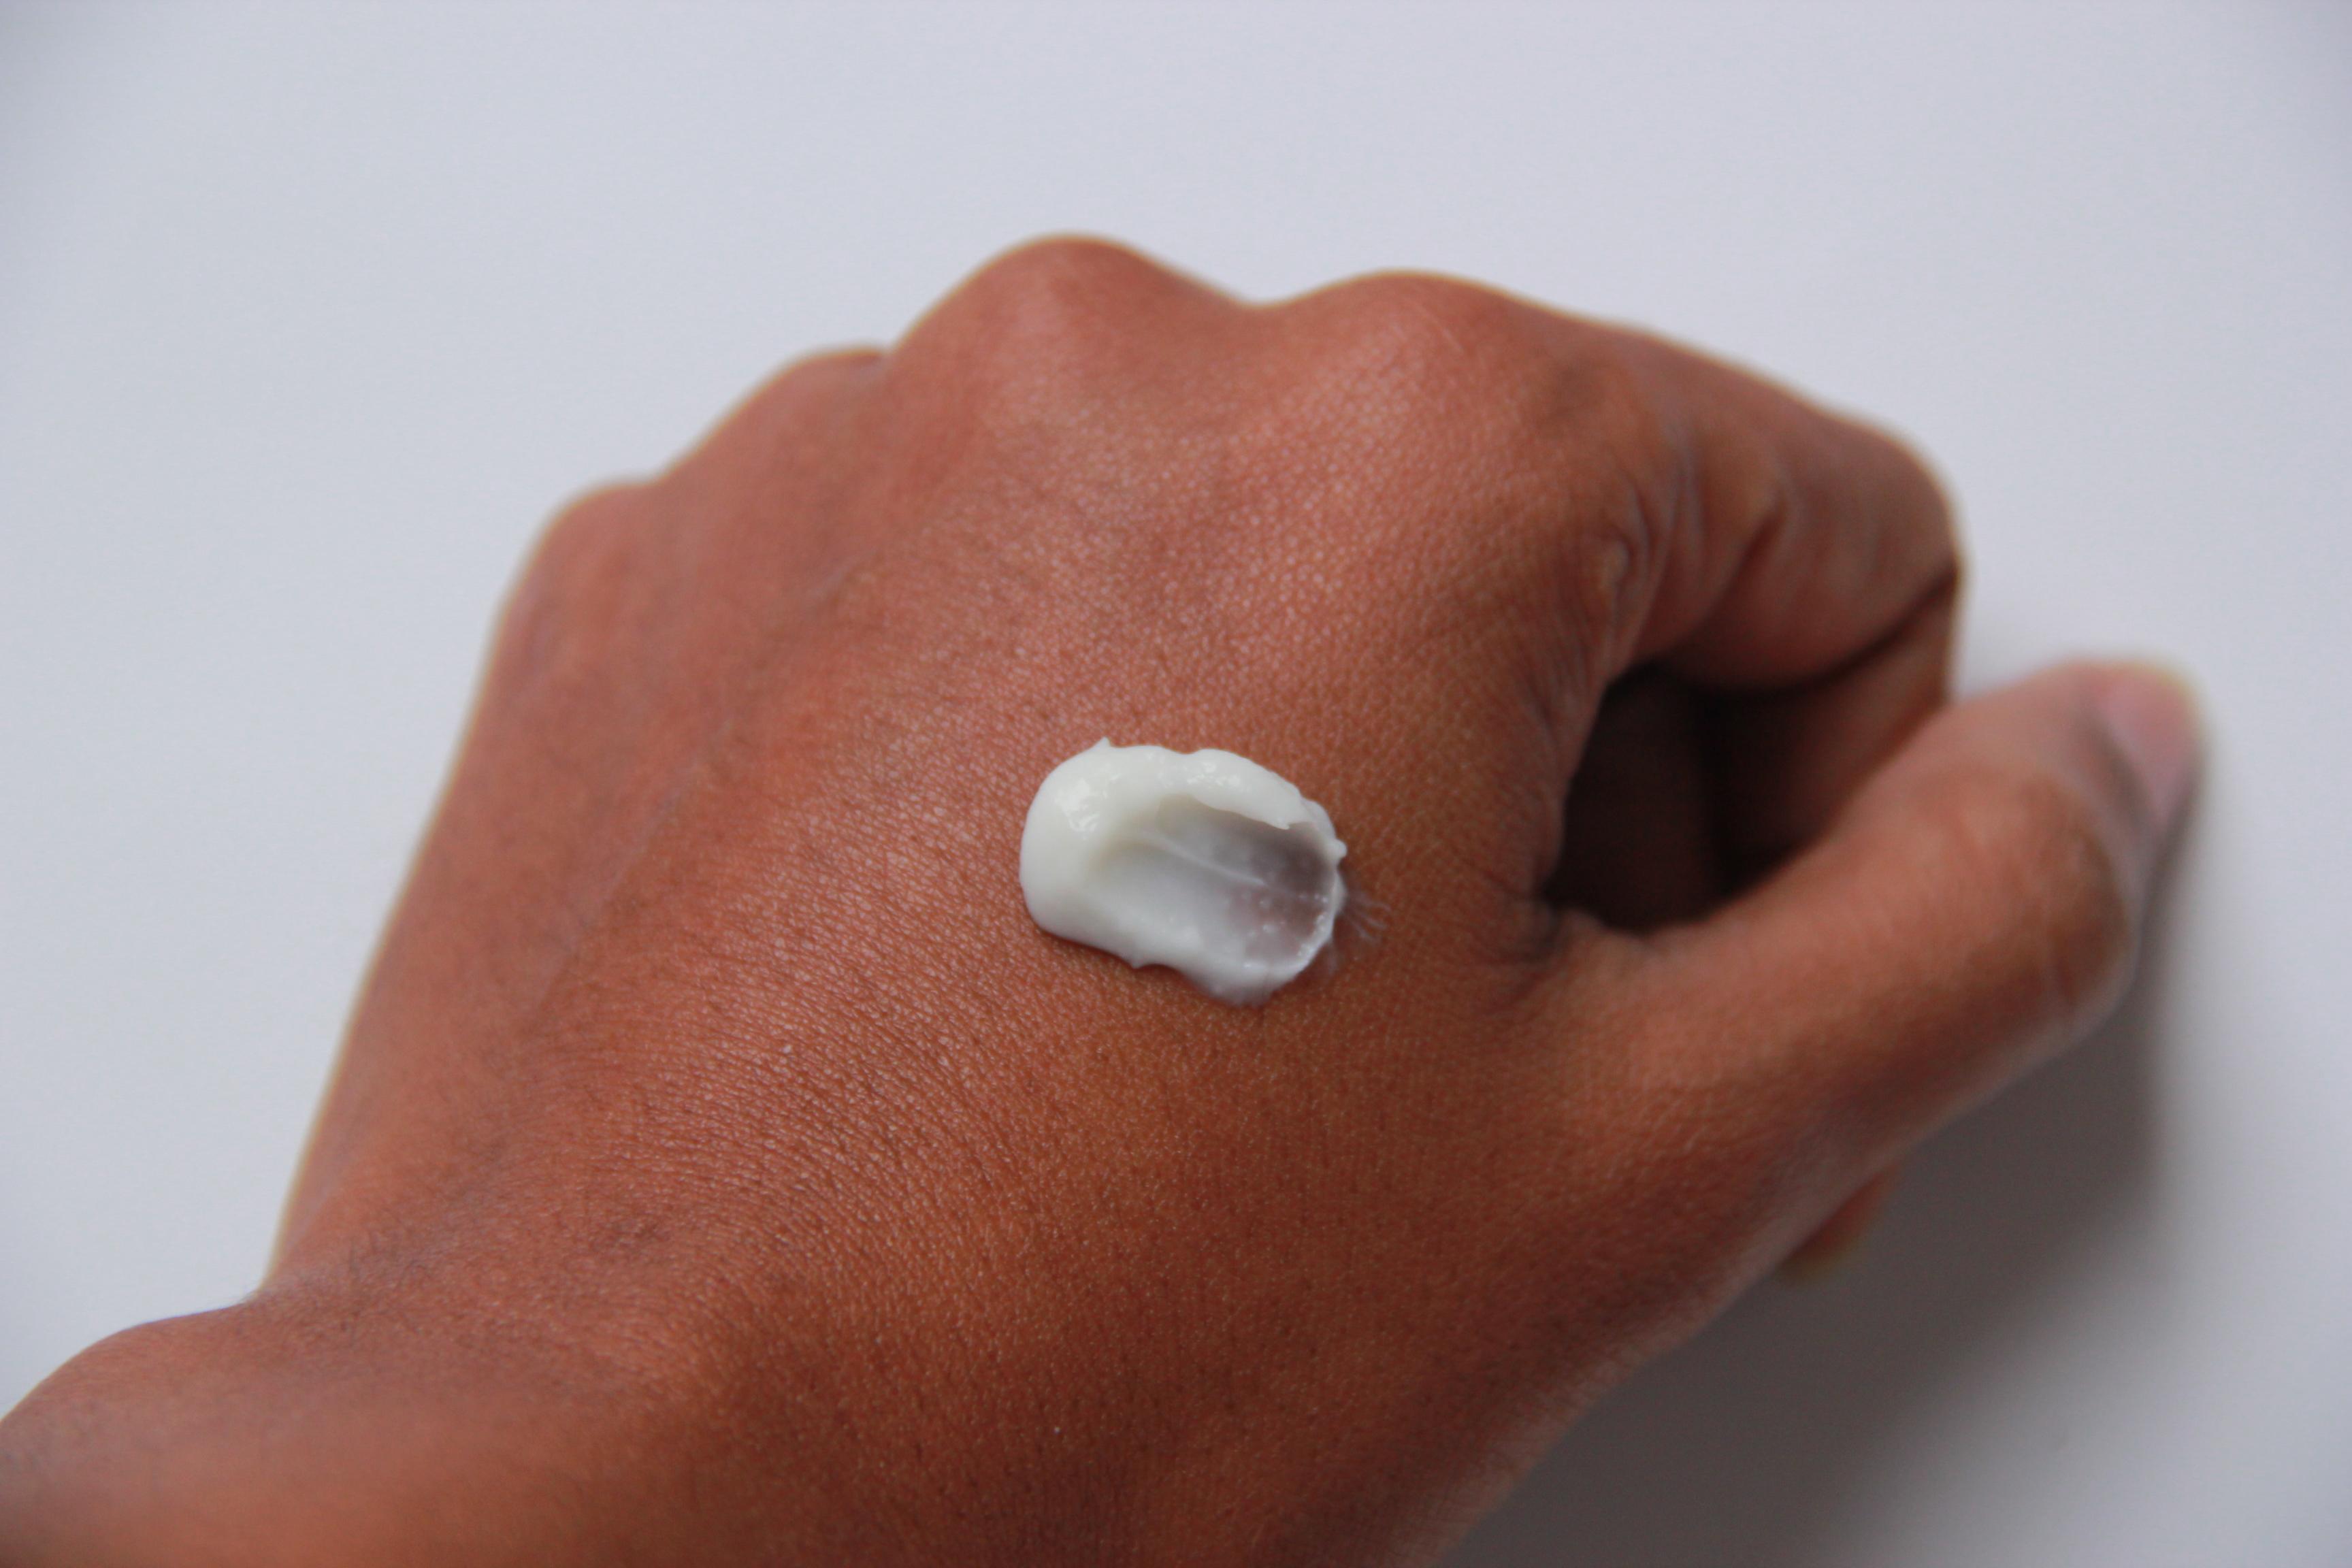 eucerin-even-brighter-day-cream-review-handswatch